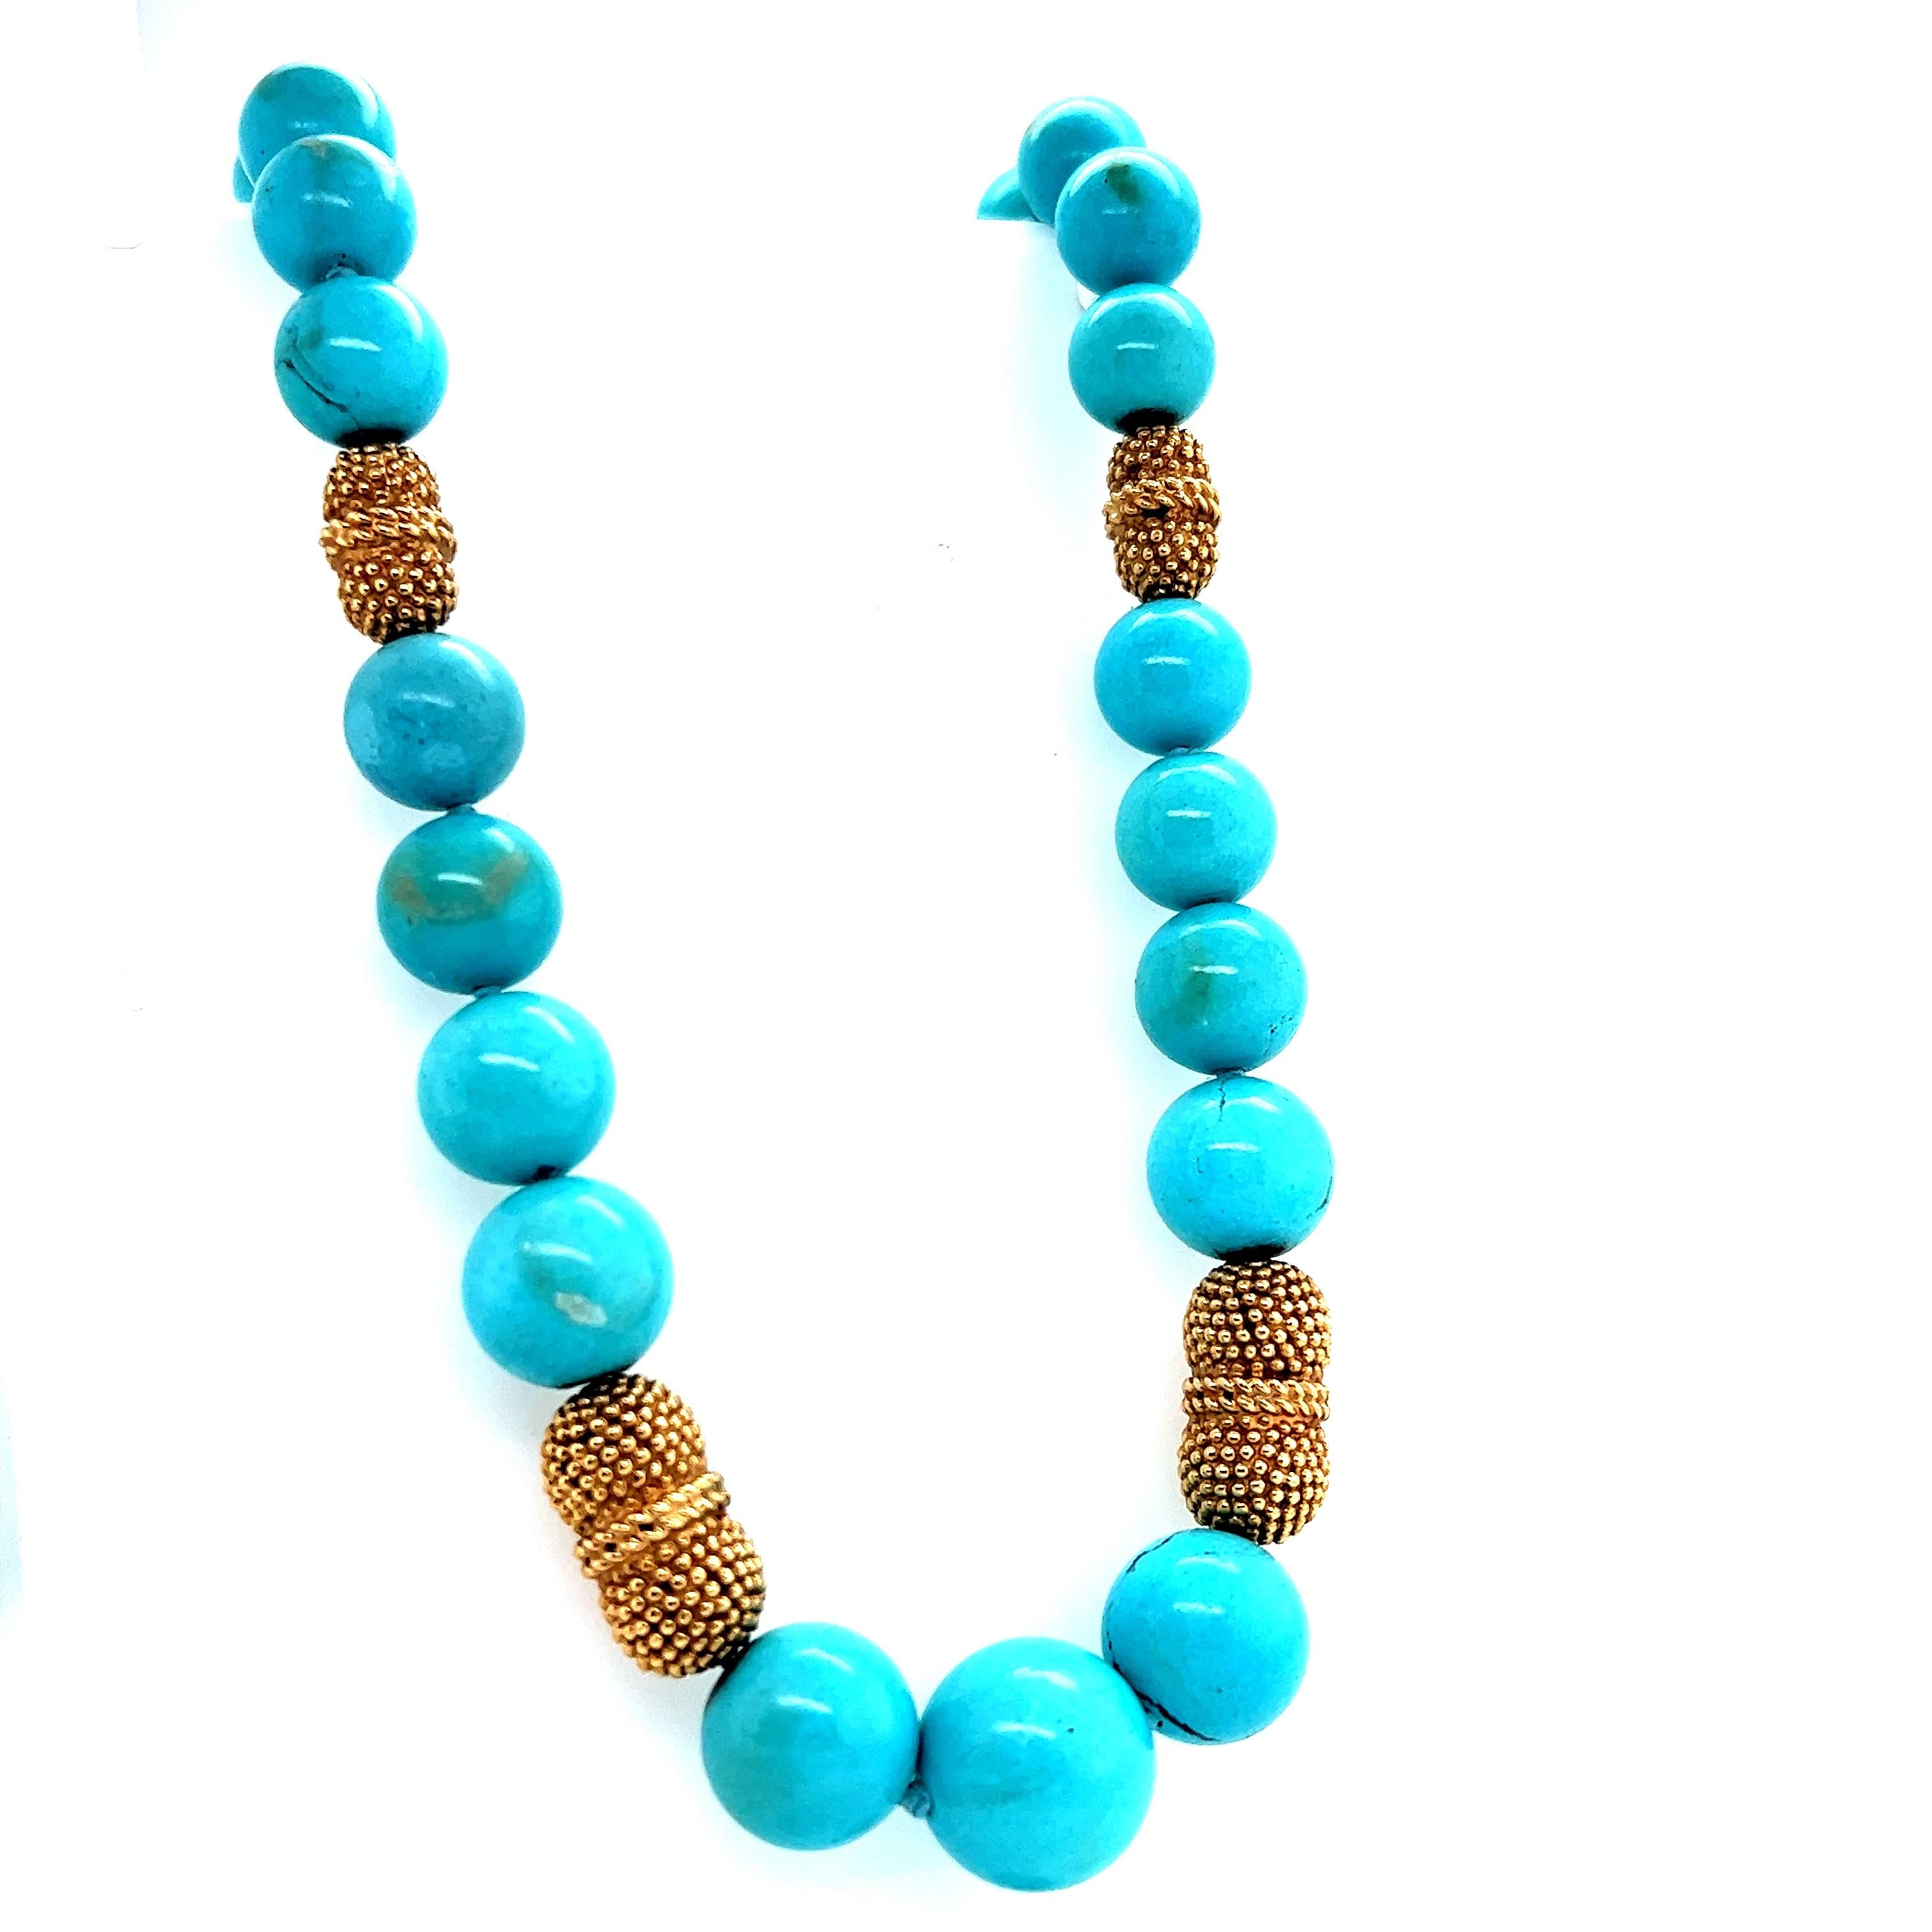 Fantastic design seen by famed jewelry house Van Cleef & Arpels. This vintage necklace is composed of natural turquoise bead gemstones. The beads measure 7.5 mm in the back of the necklace and graduate to 15 mm in the front of the design.  The